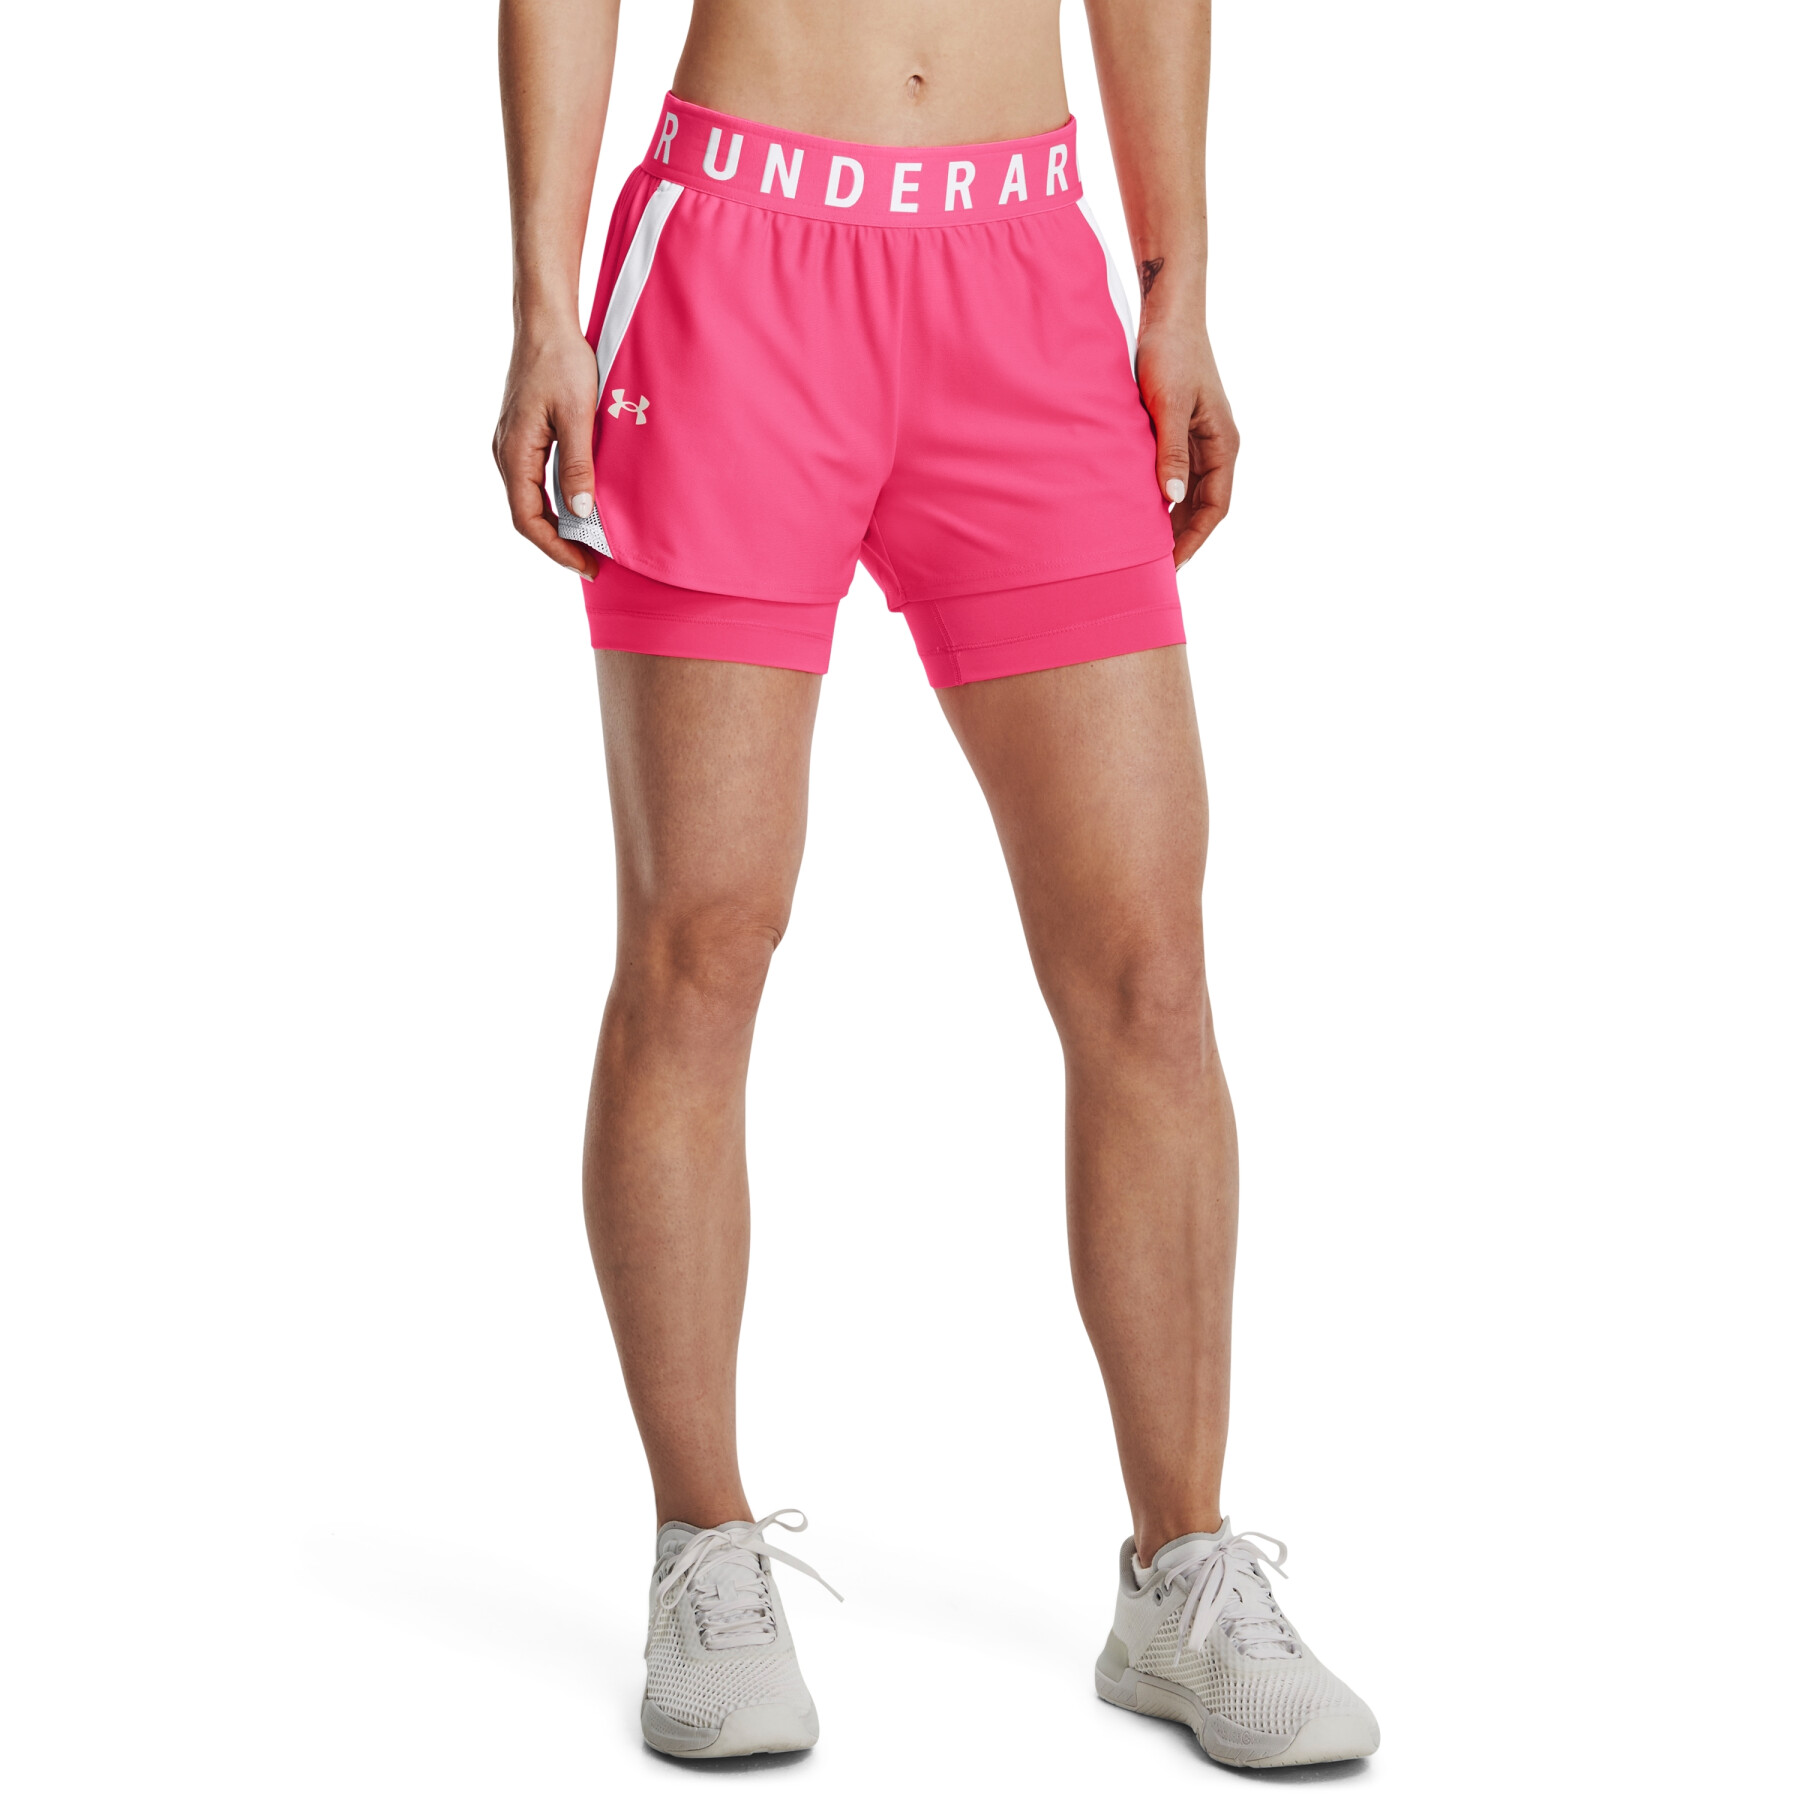 Women's 2-in-1 shorts Under Armour Play up